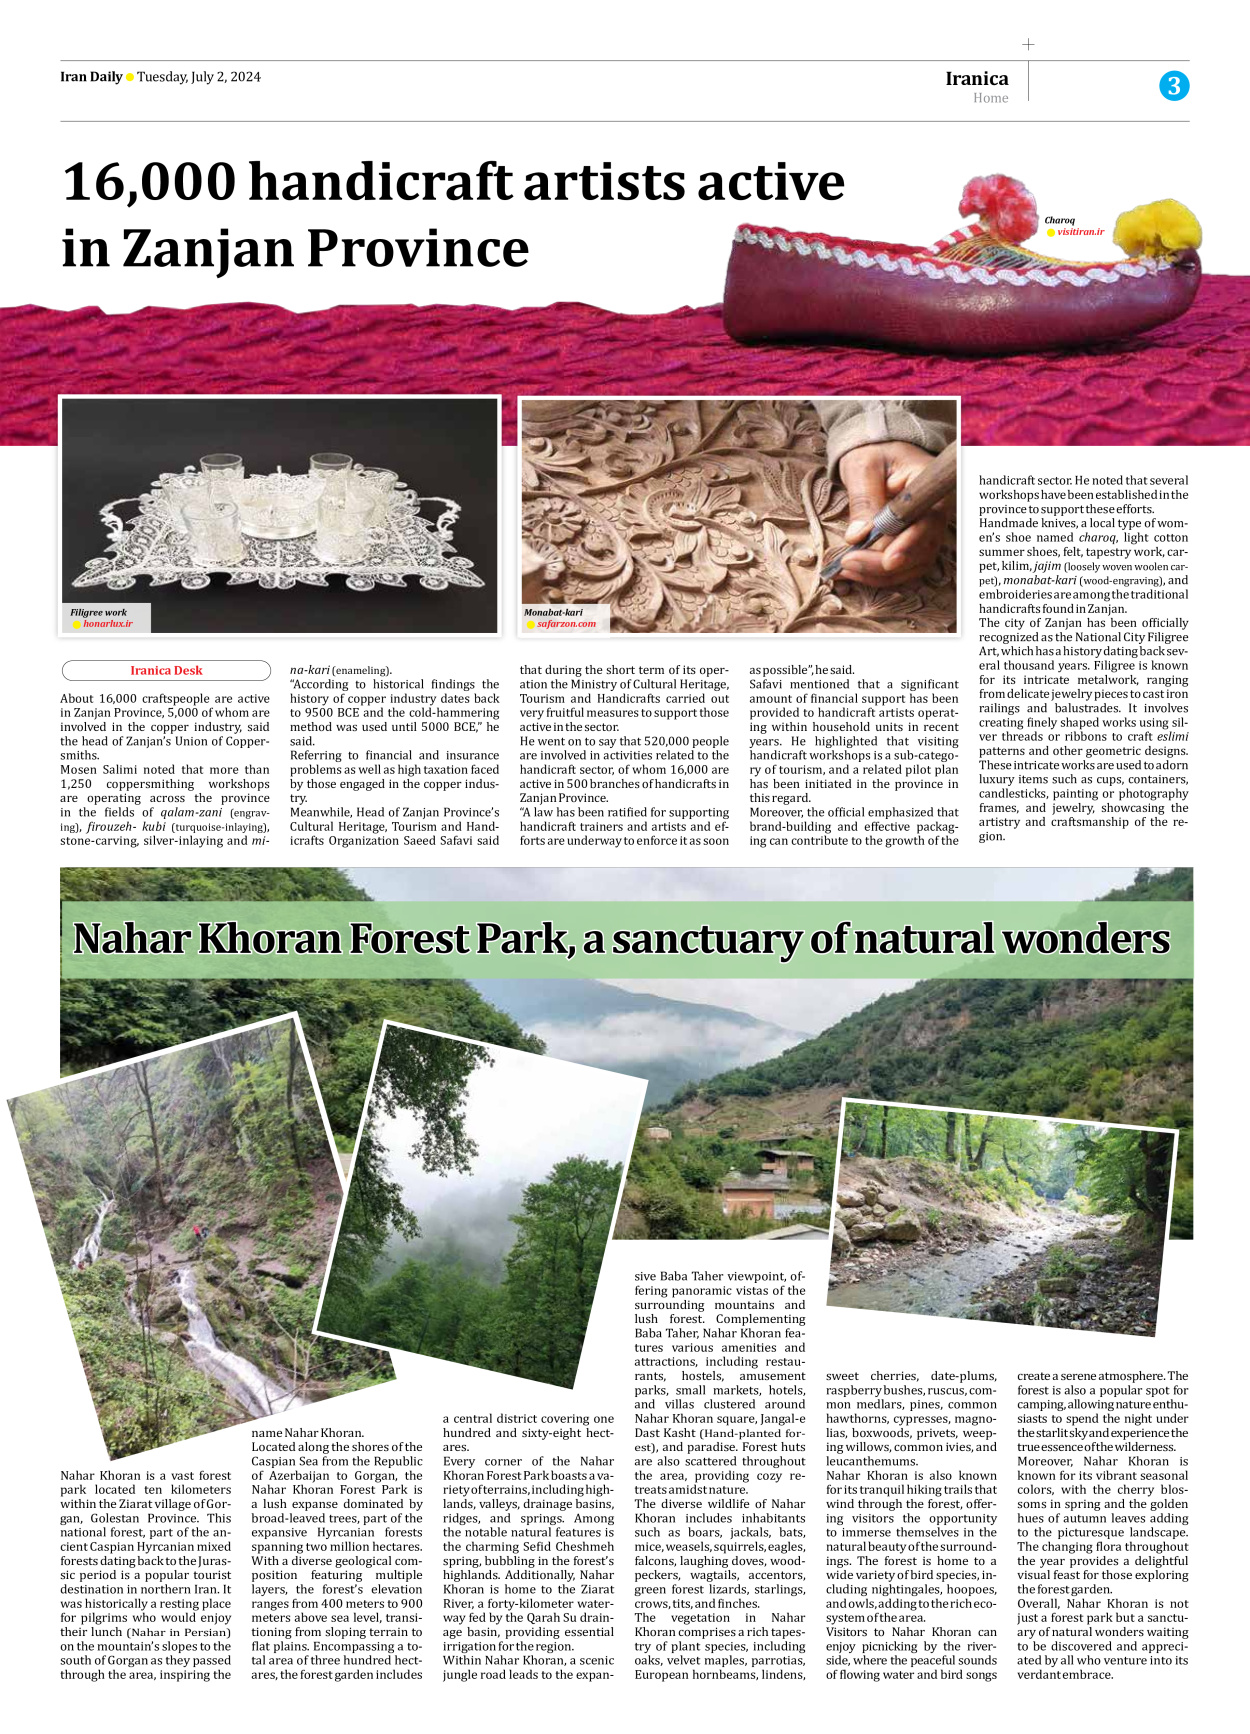 Iran Daily - Number Seven Thousand Five Hundred and Ninety Four - 02 July 2024 - Page 3